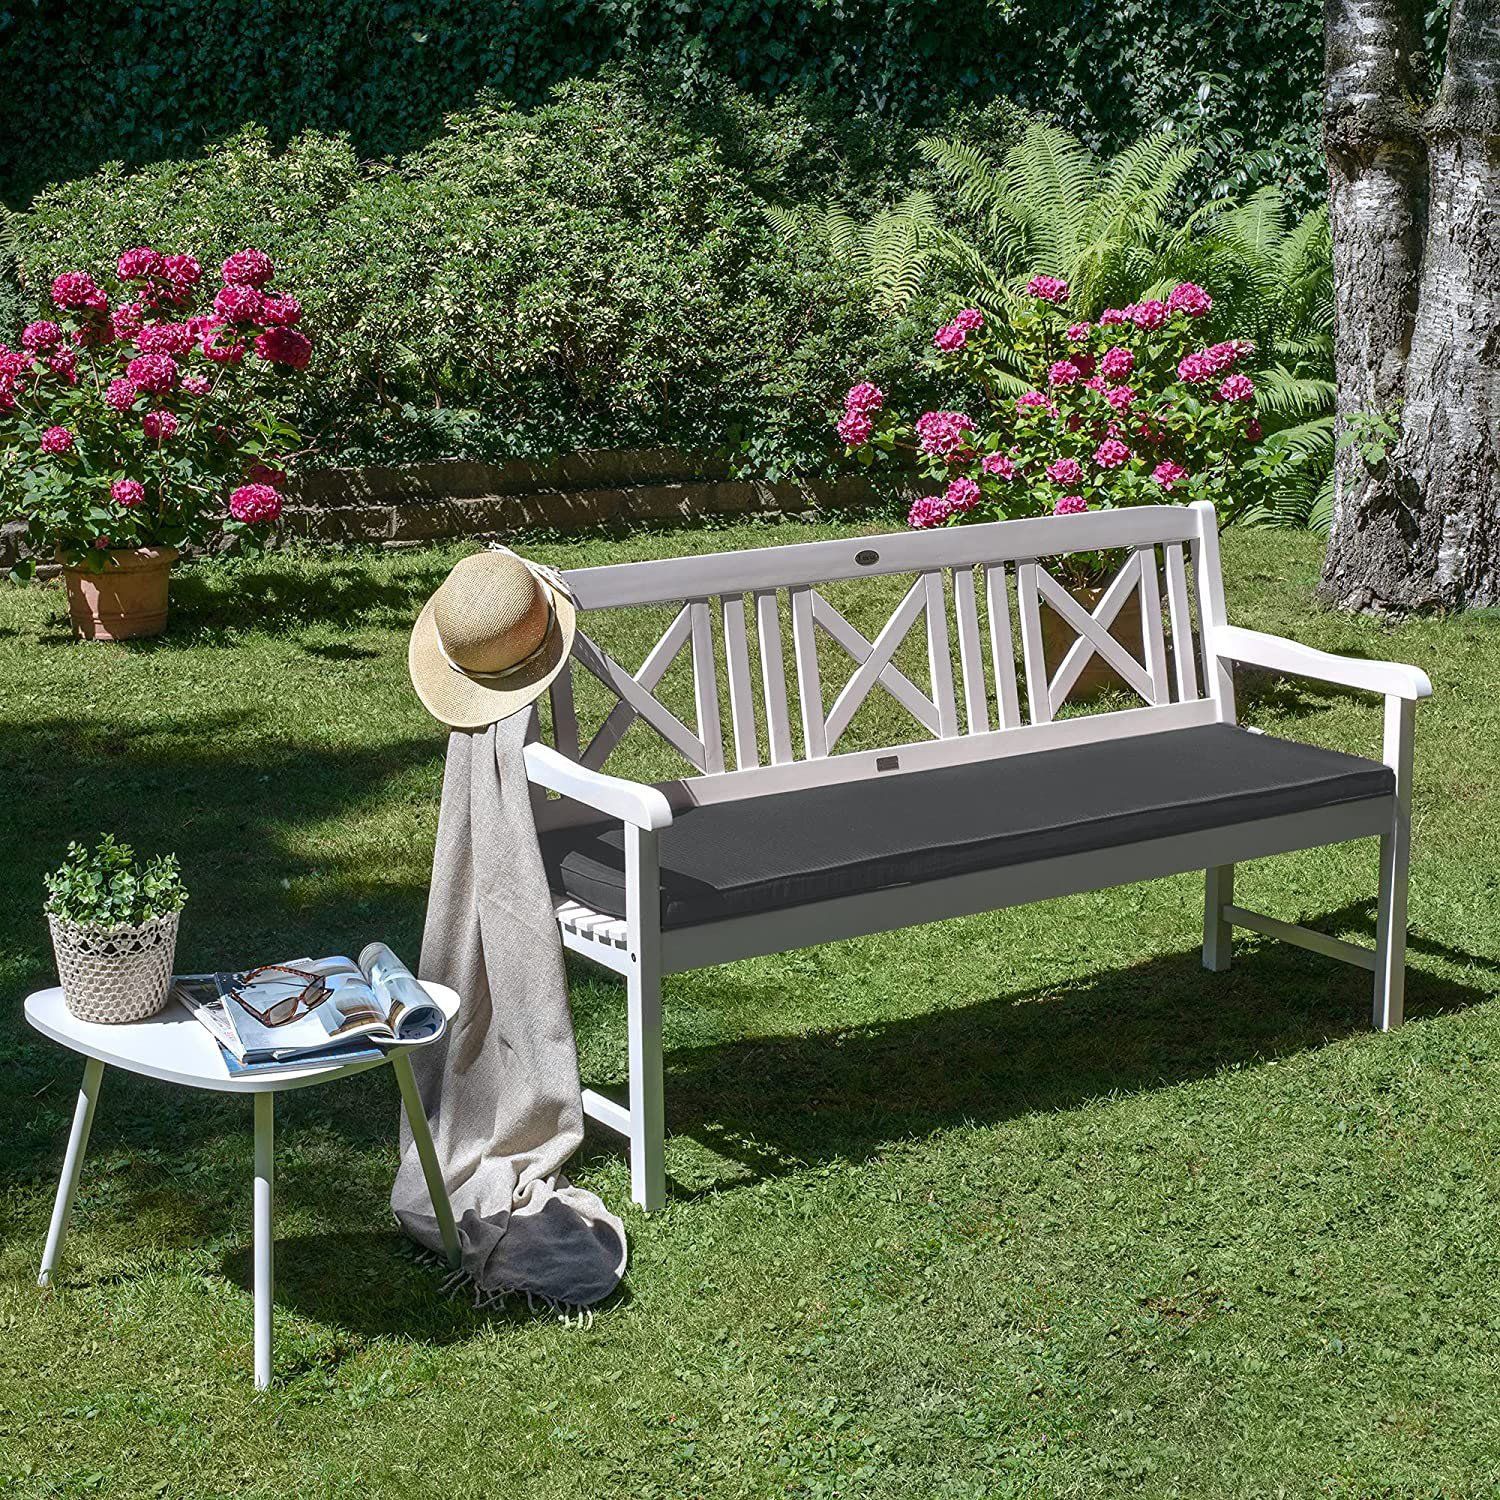 15 Unique and Amazing Lawn Displays - Bench with Cushion